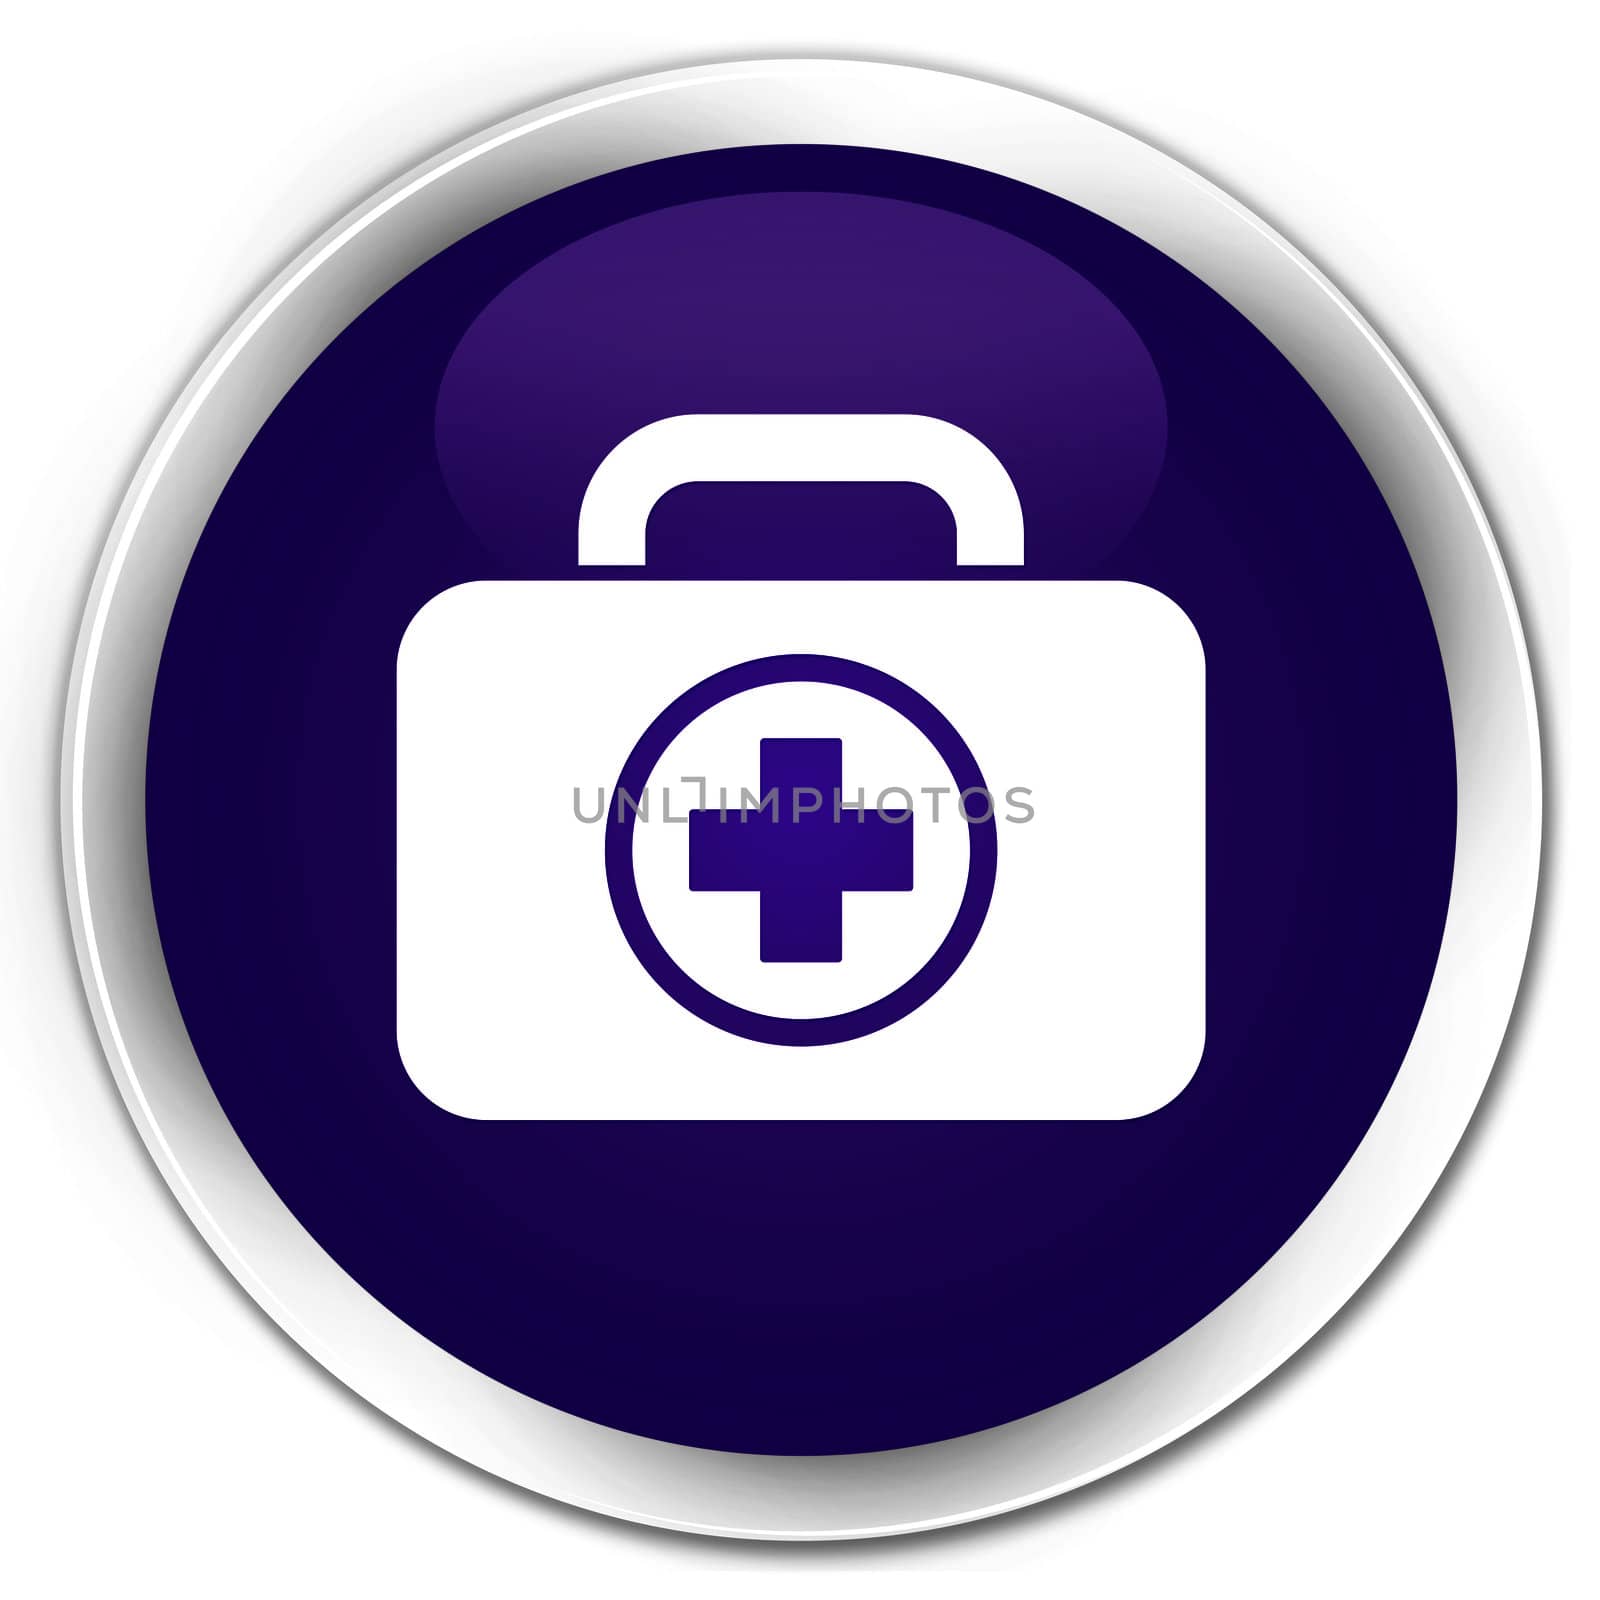 First aid kit icon glossy purple round button